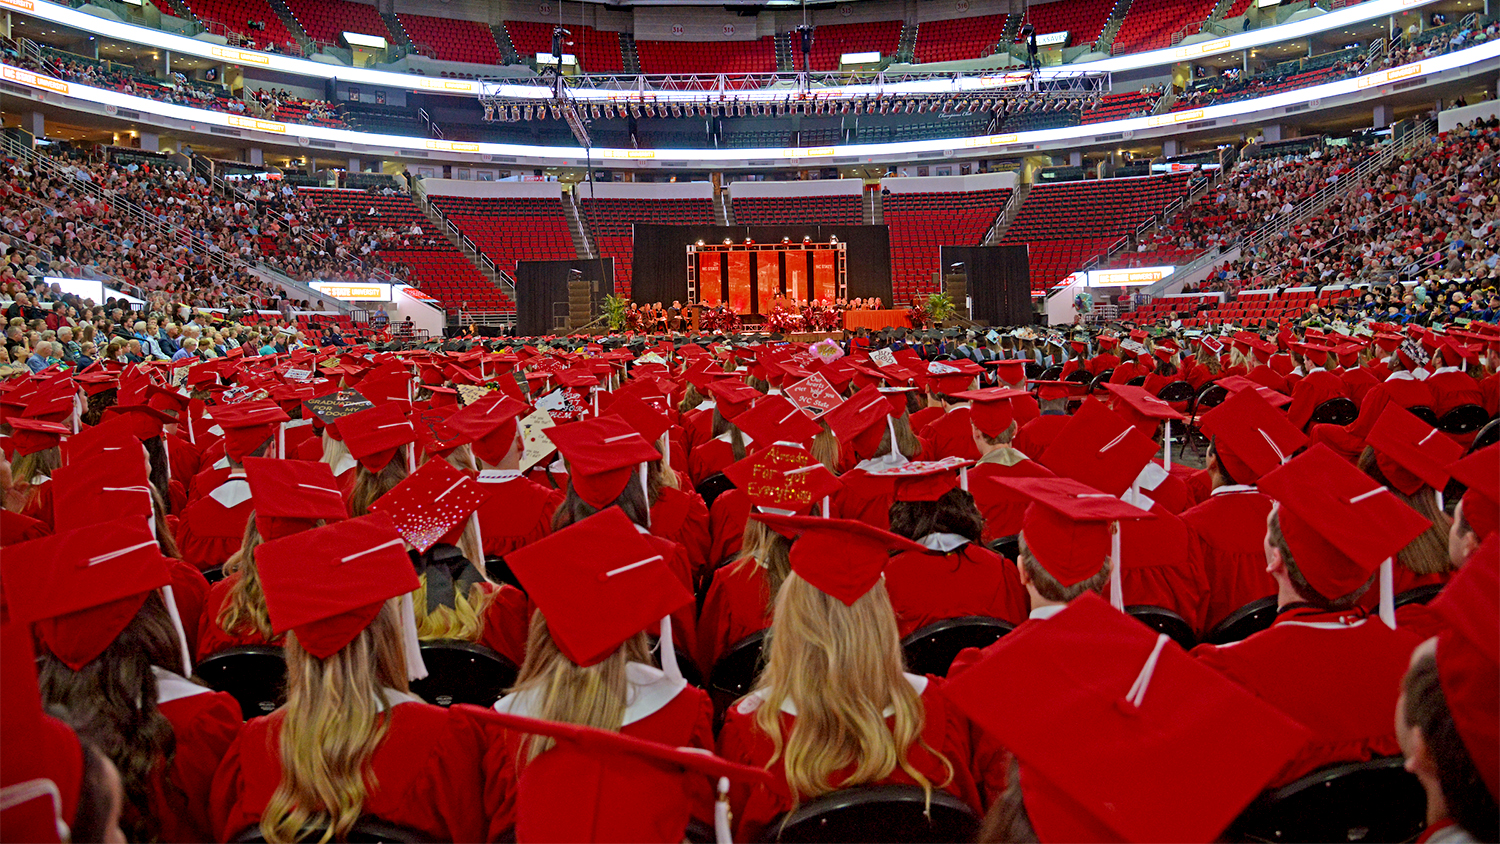 Graduating students dressed in red caps and gowns sit together on the floor of the PNC Arena during a commencement ceremony. The mid and upper seating decks and event stage are visible in the background.